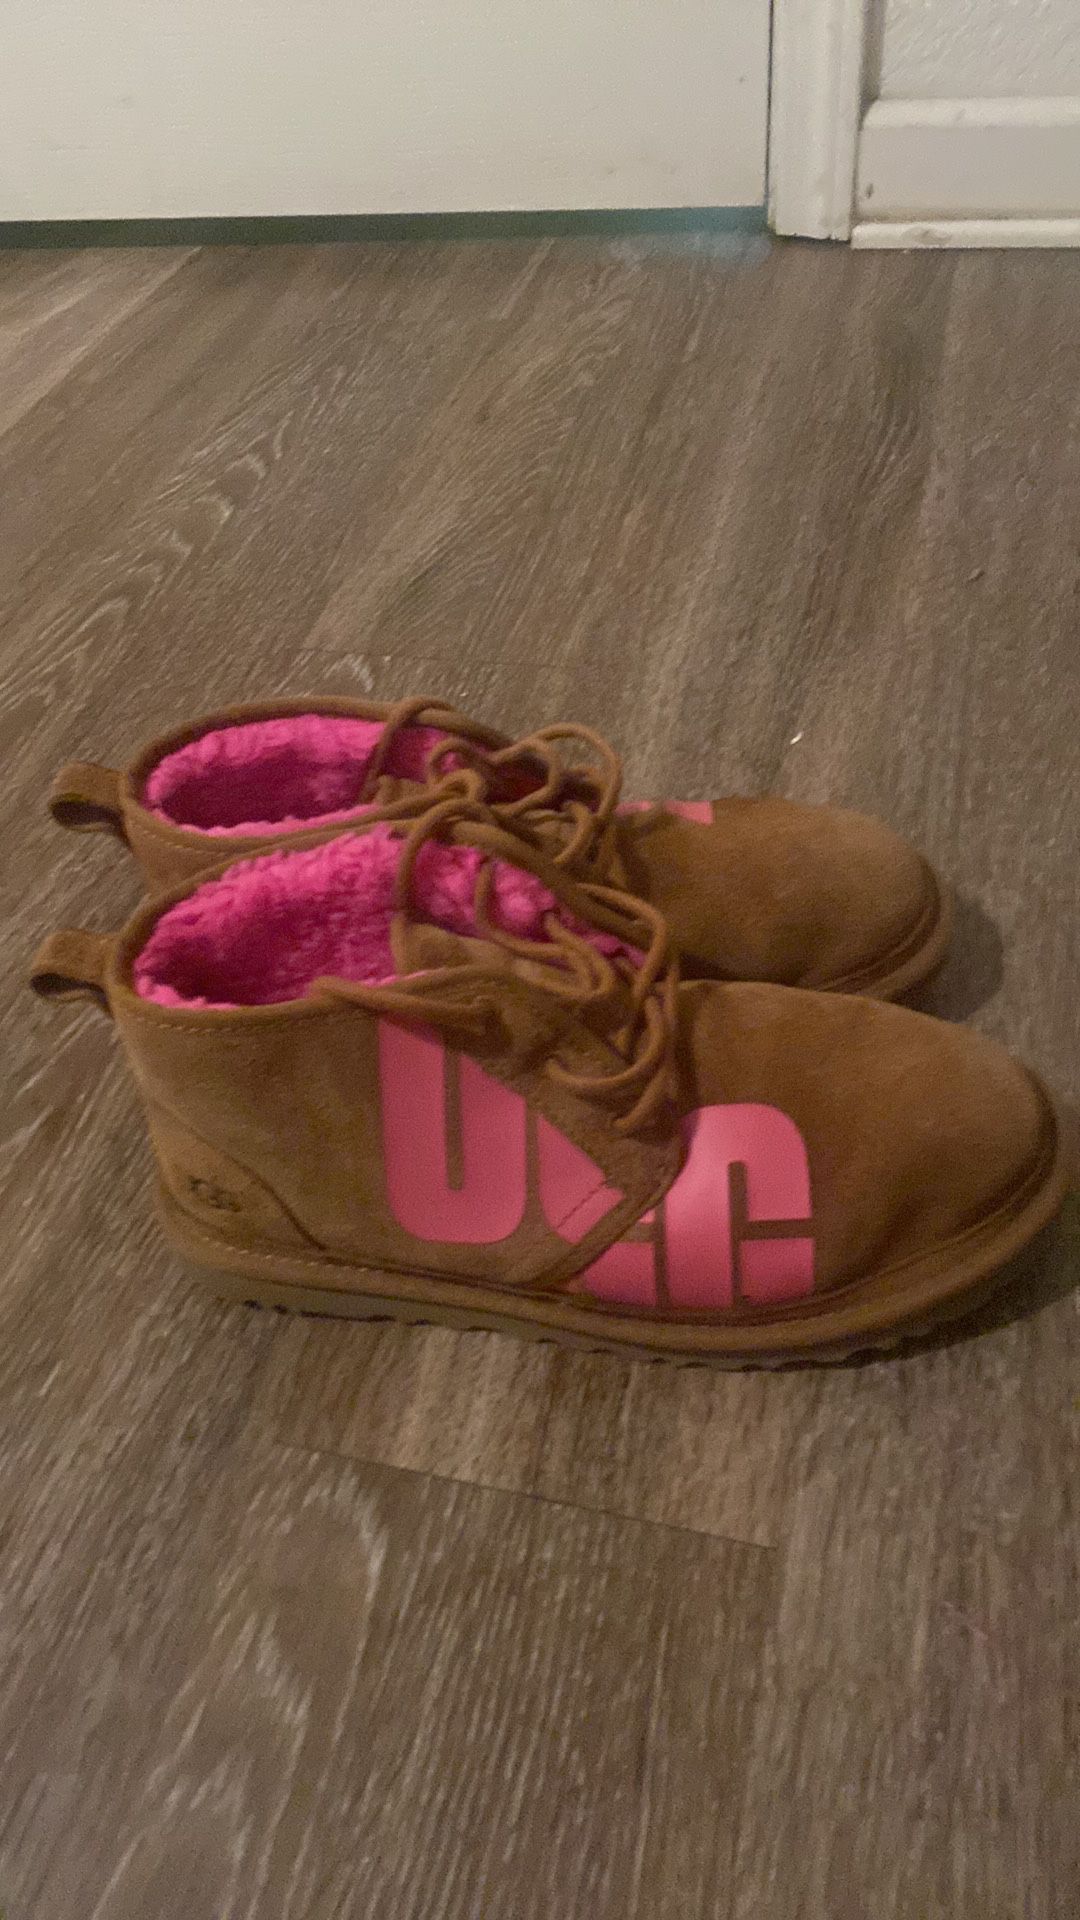 Uggs Brown & Pink Size 10 